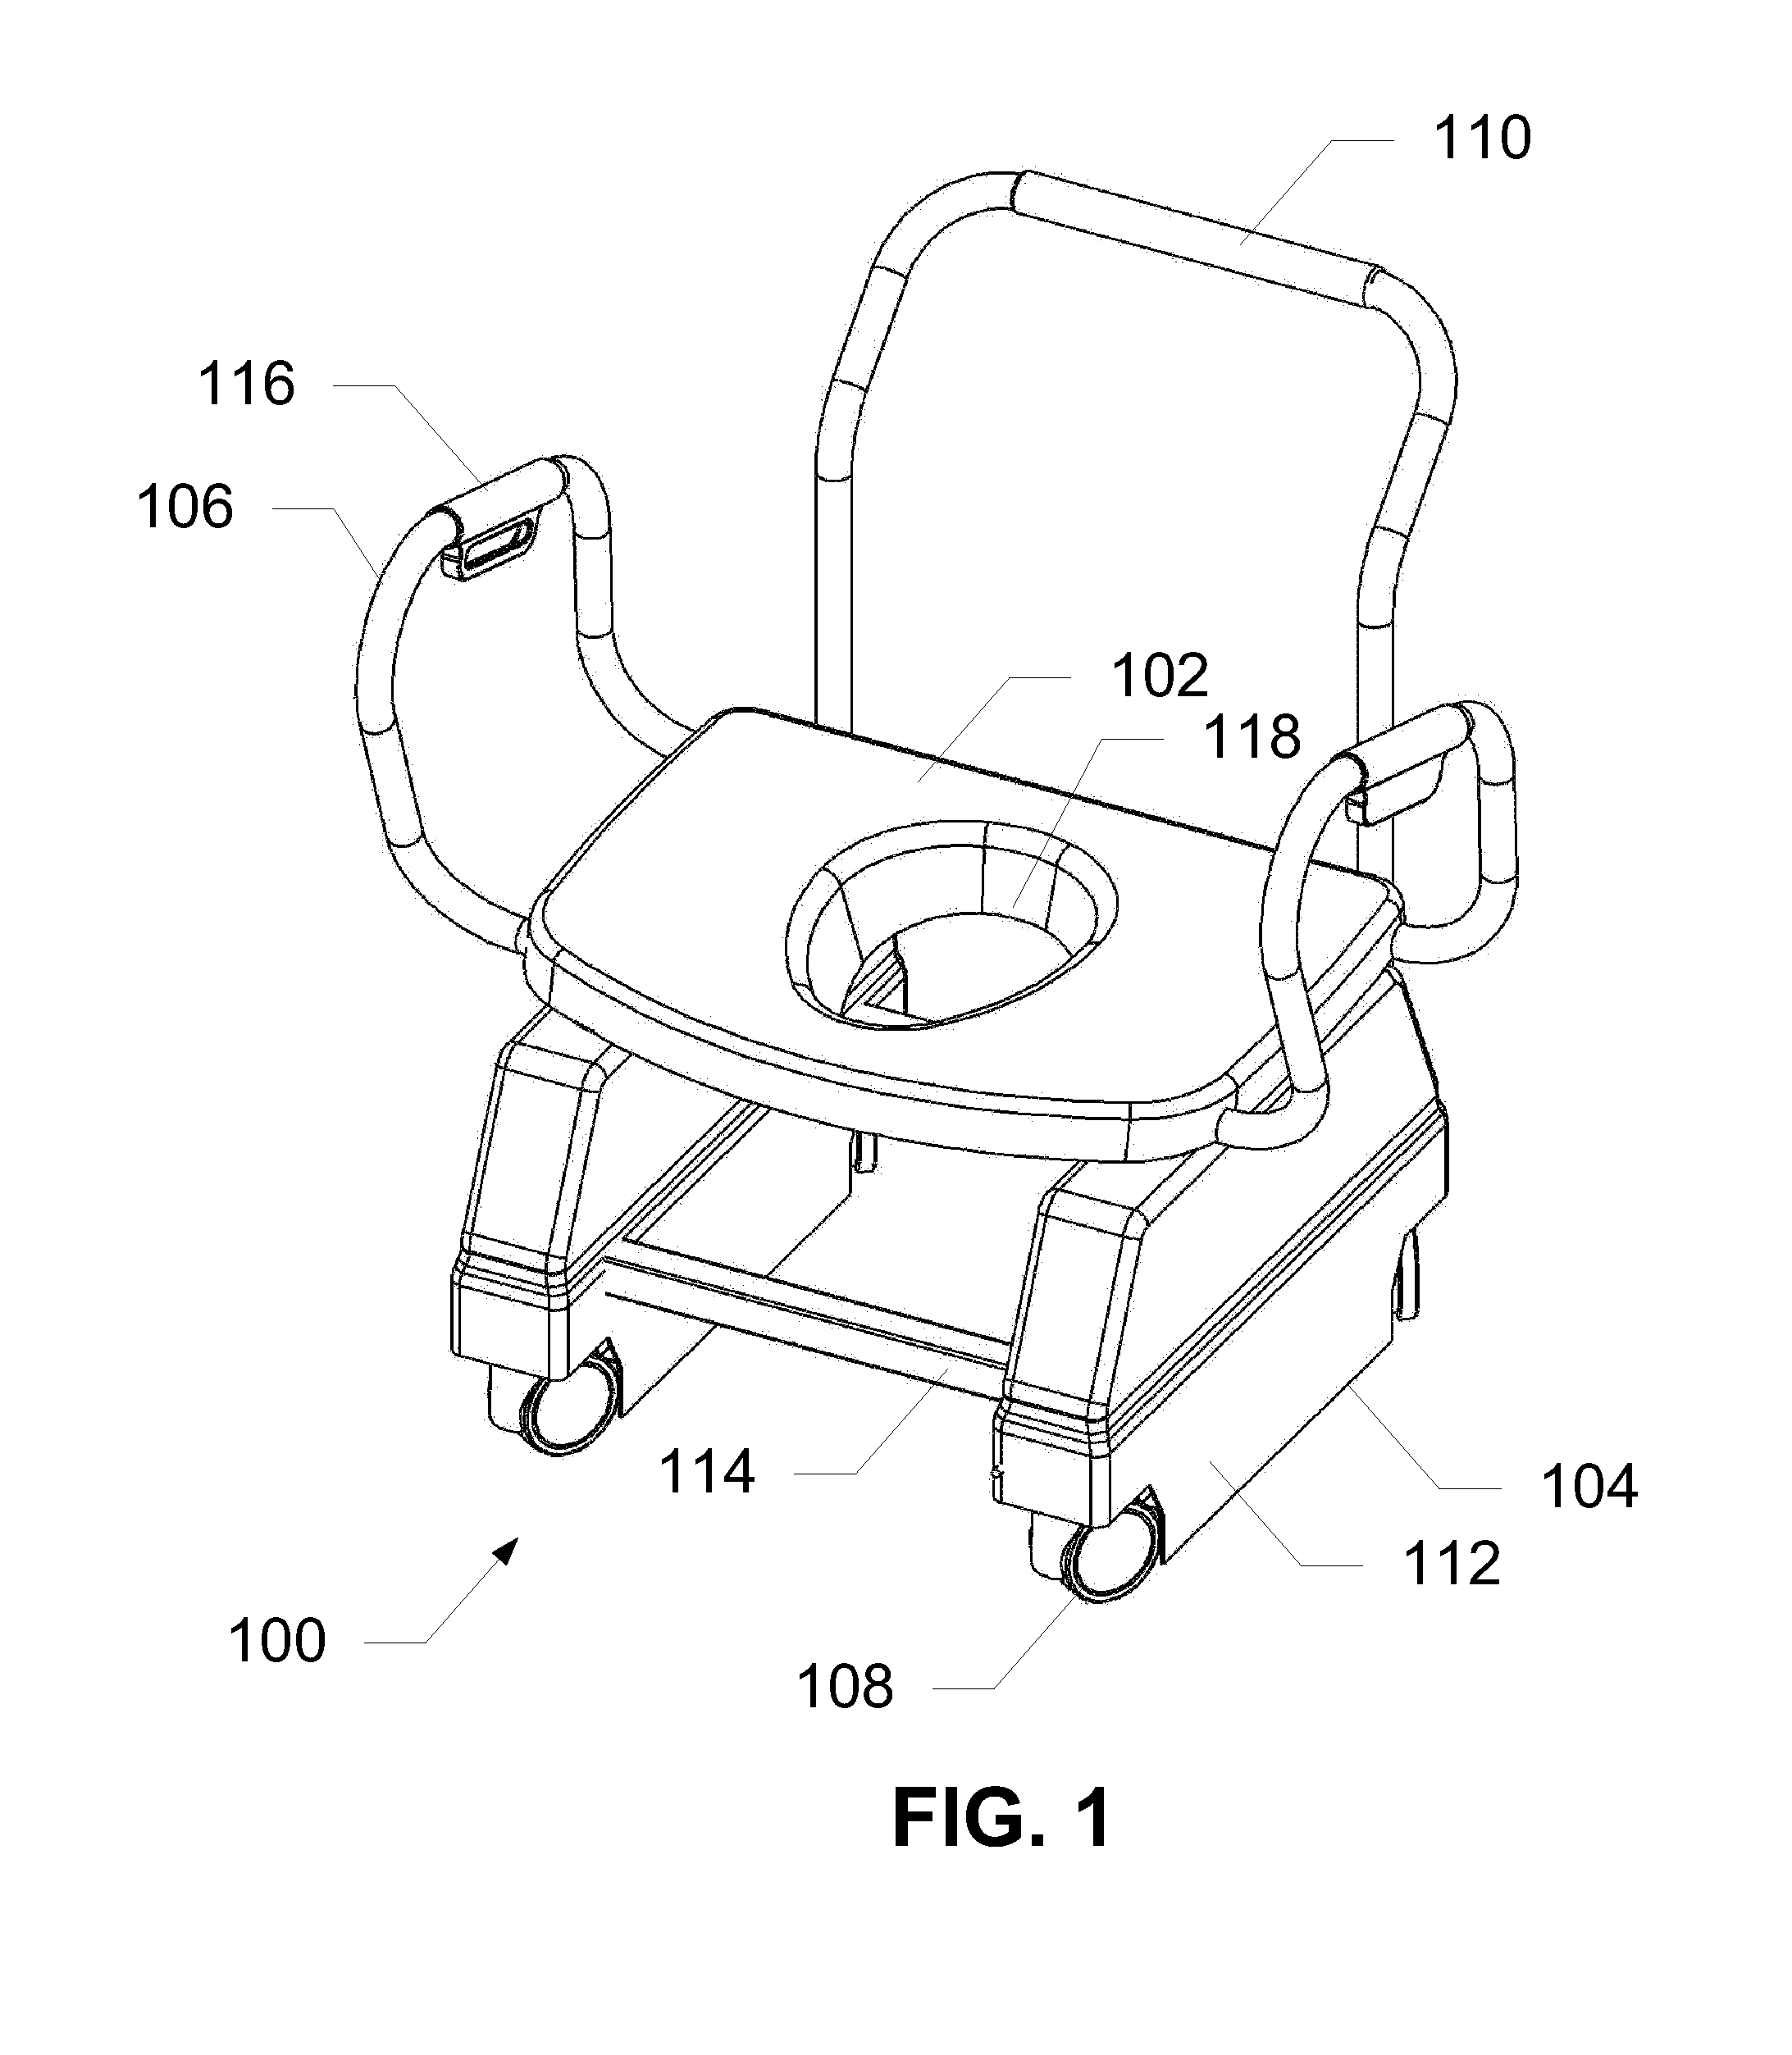 Devices and Methods for Lift Assistance